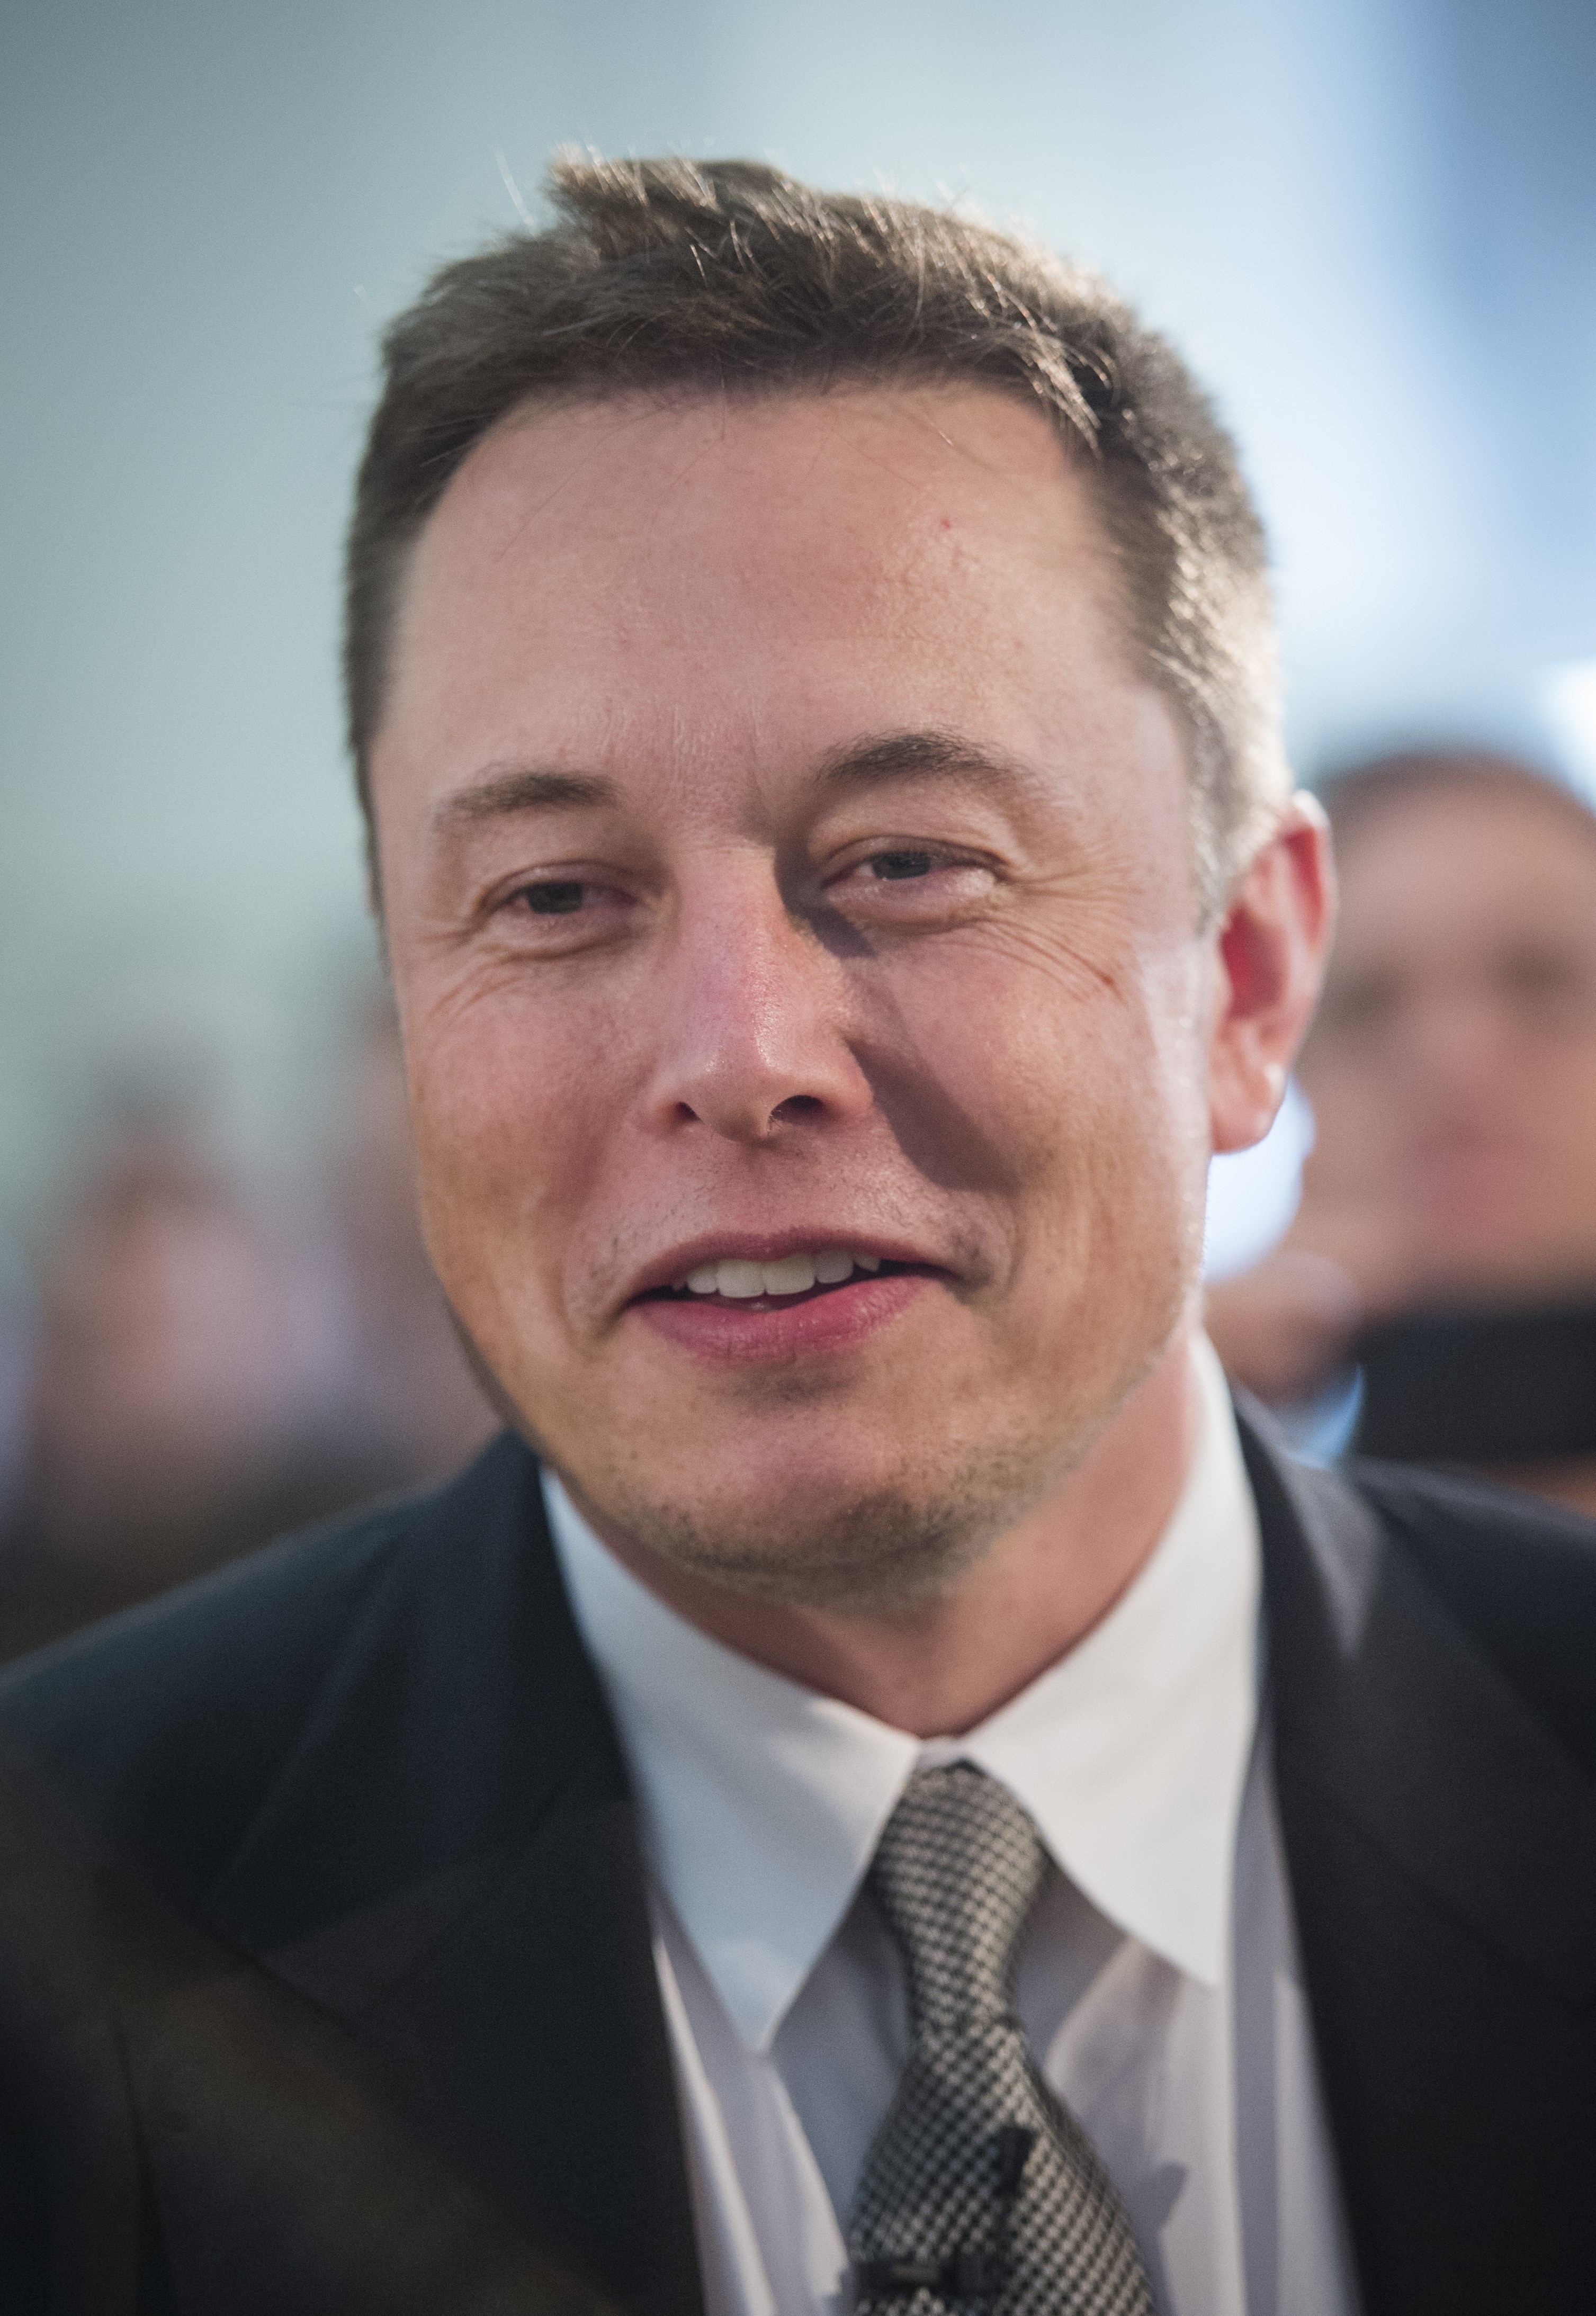 Elon Musk at a seminar hosted by German Economy Minister Sigmar Gabriel in Berlin on Sept. 24, 2015.